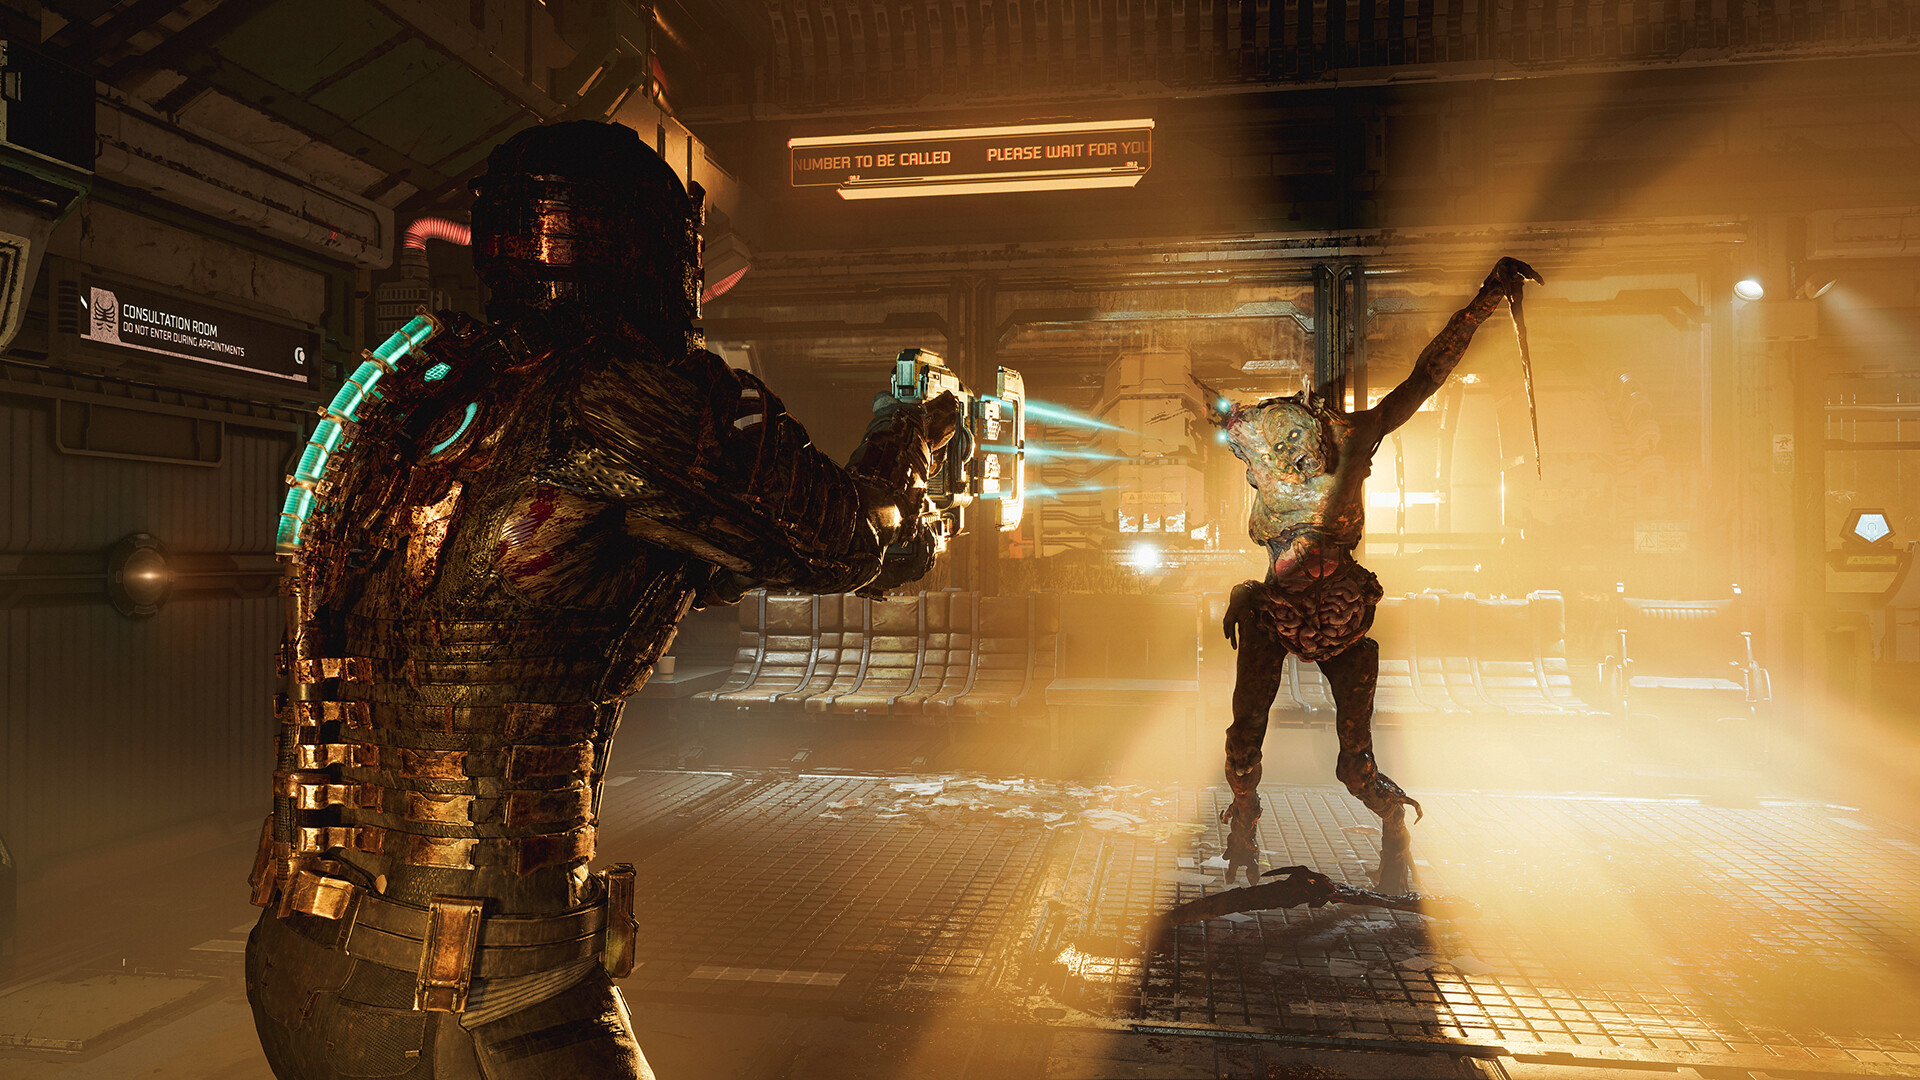 Isaac fights an alien in Dead Space remake.